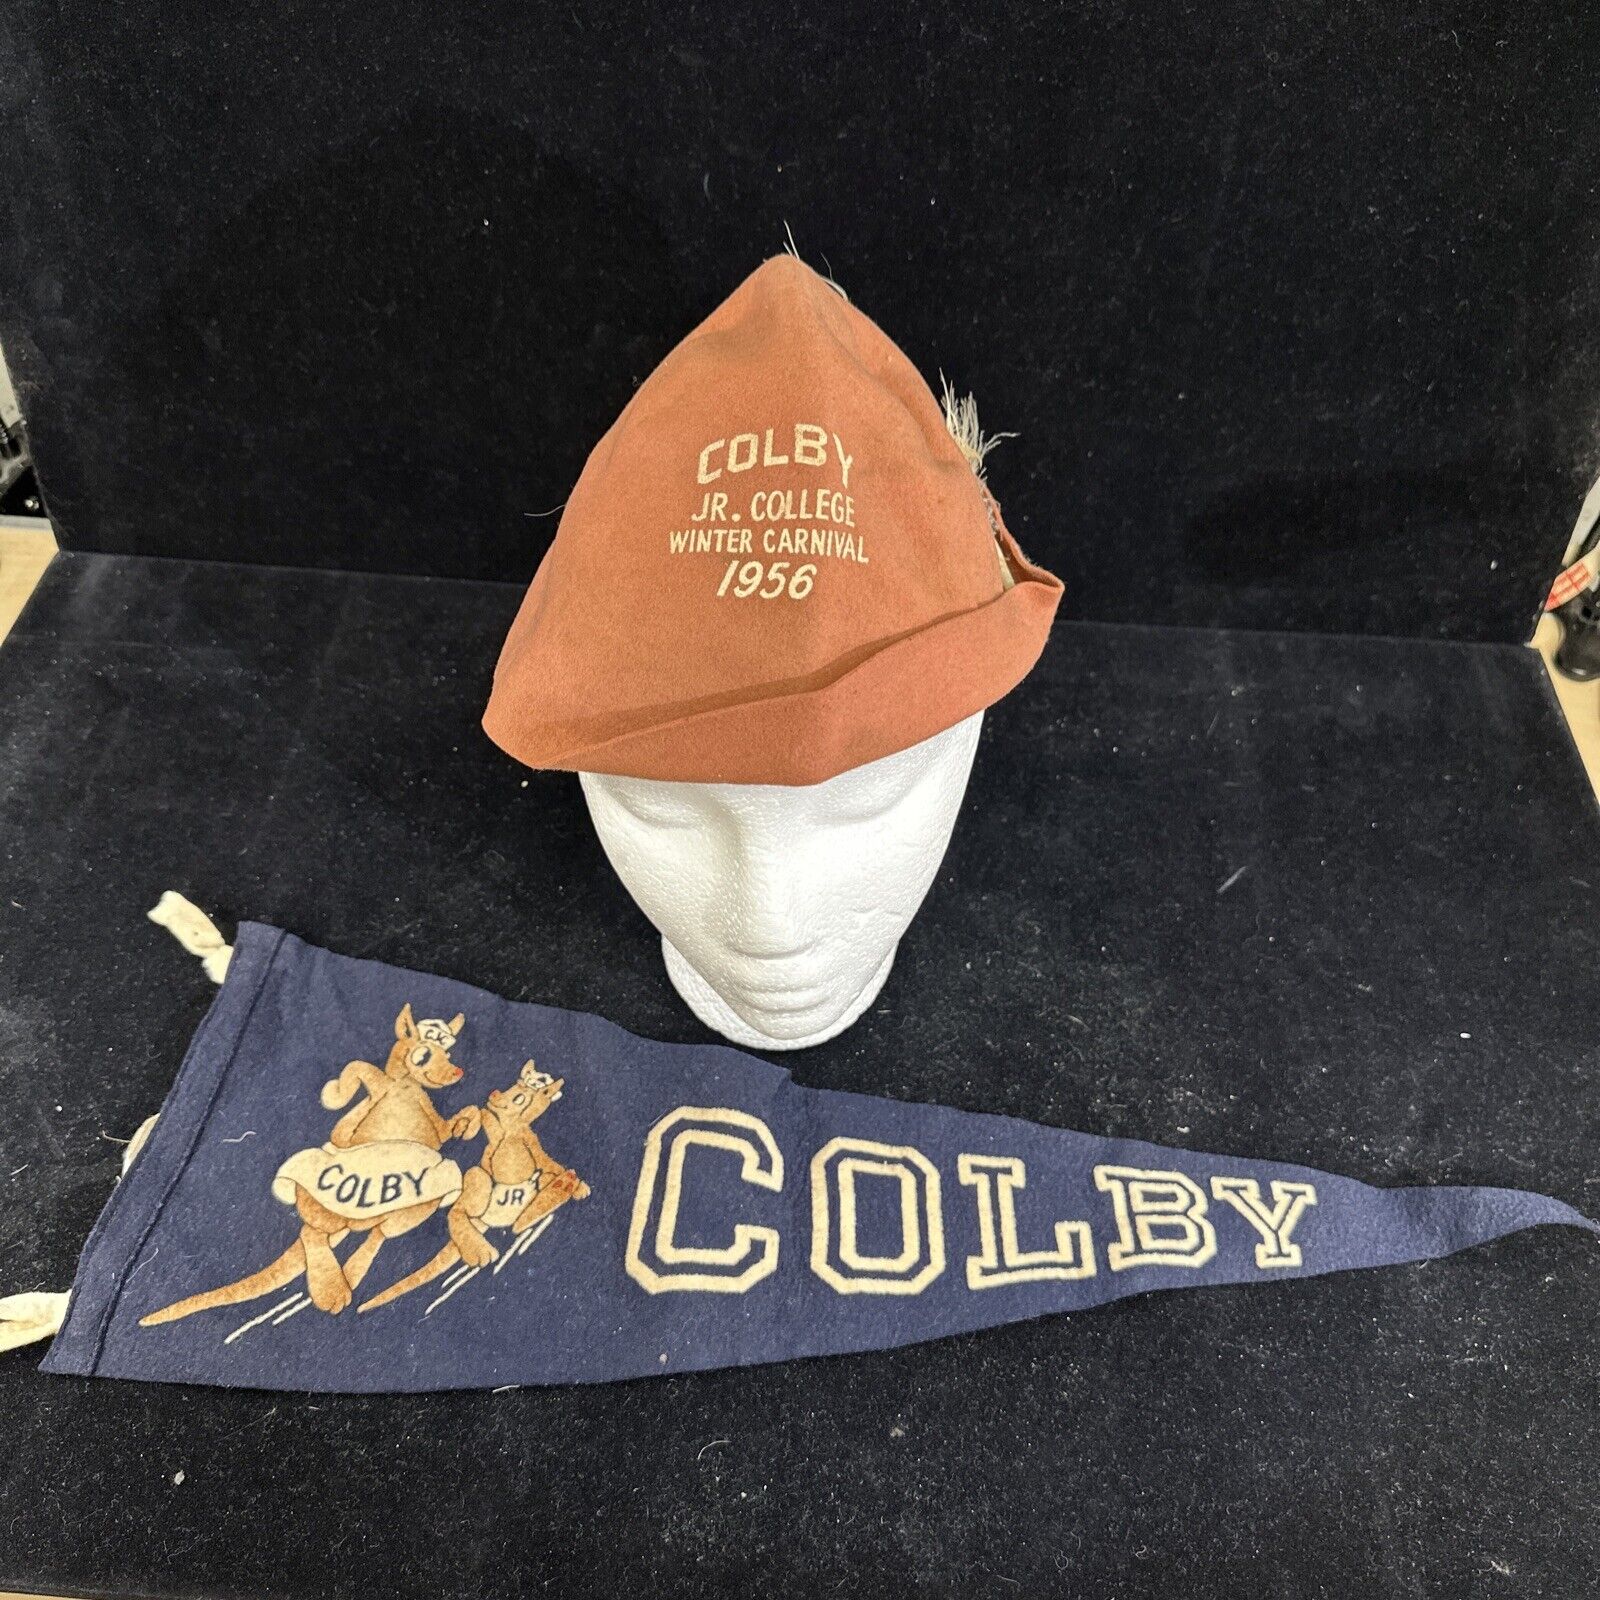 Colby Junior College New London, NH 1956 Felt Pennant & Hat Womens College DGW